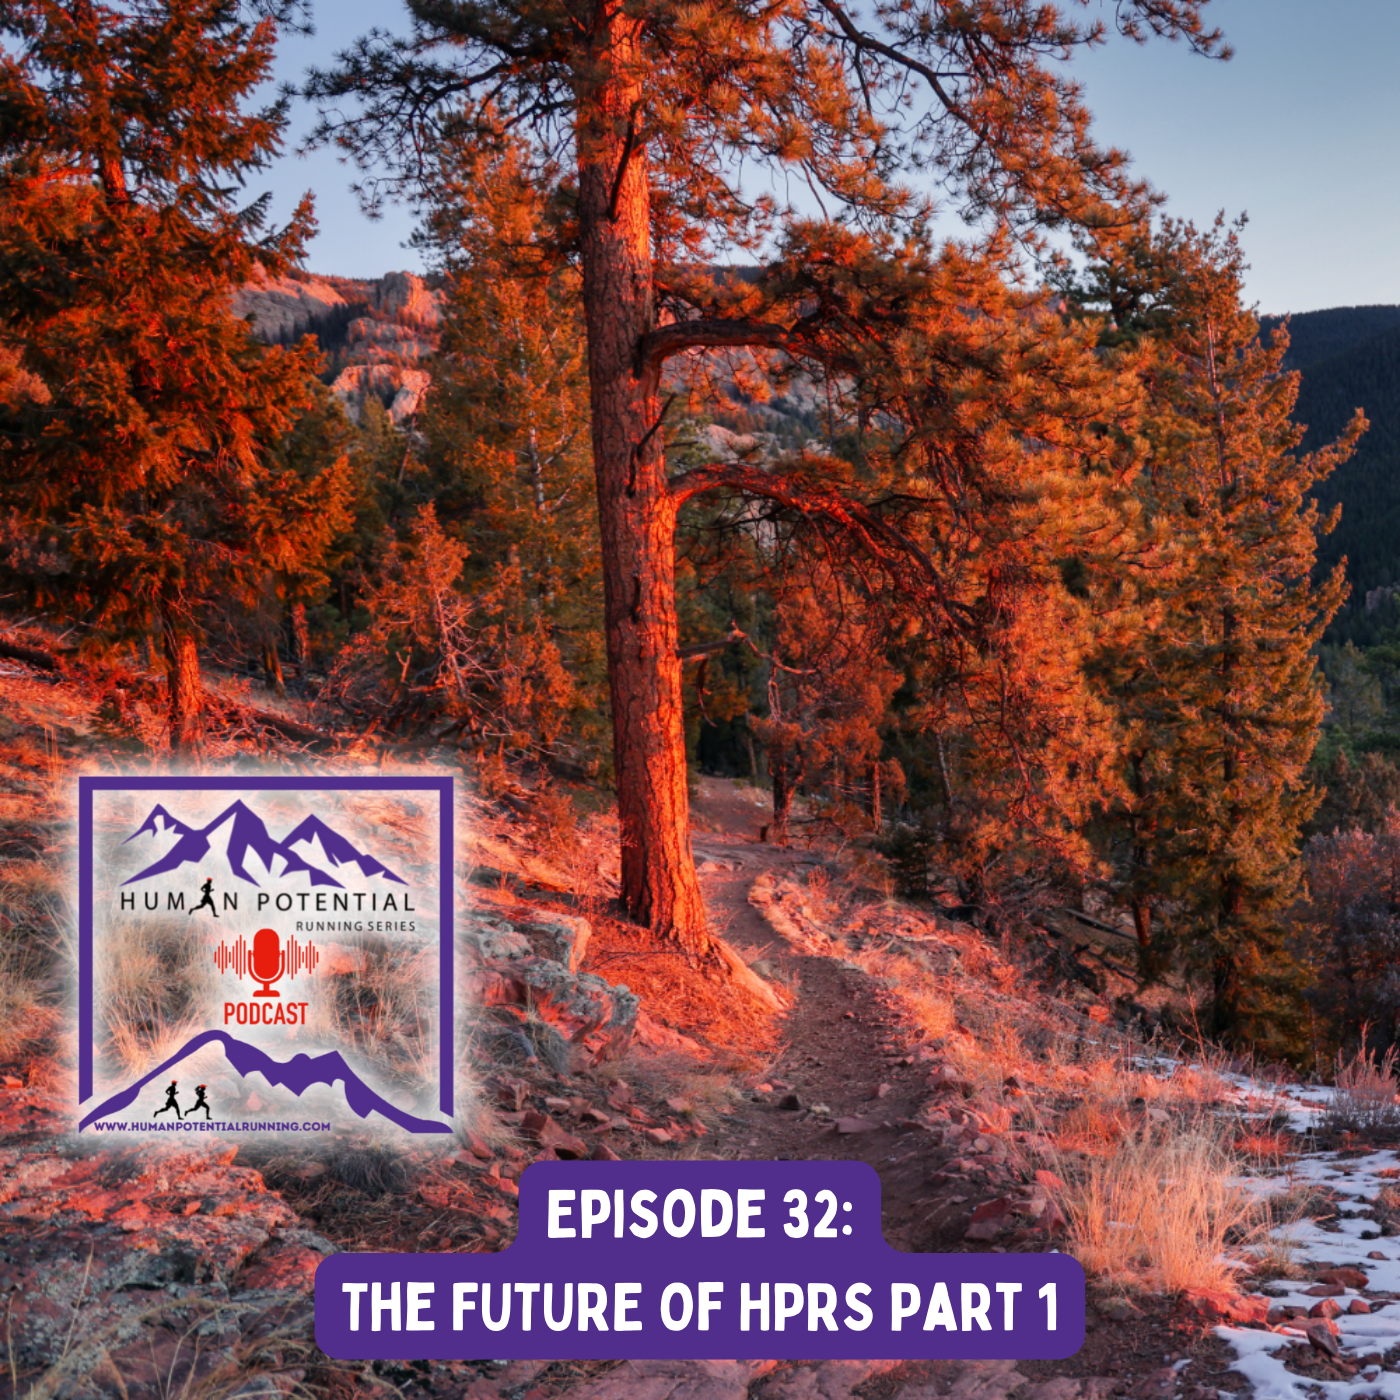 HPRS Podcast – Episode 32: The Future of HPRS Part 1